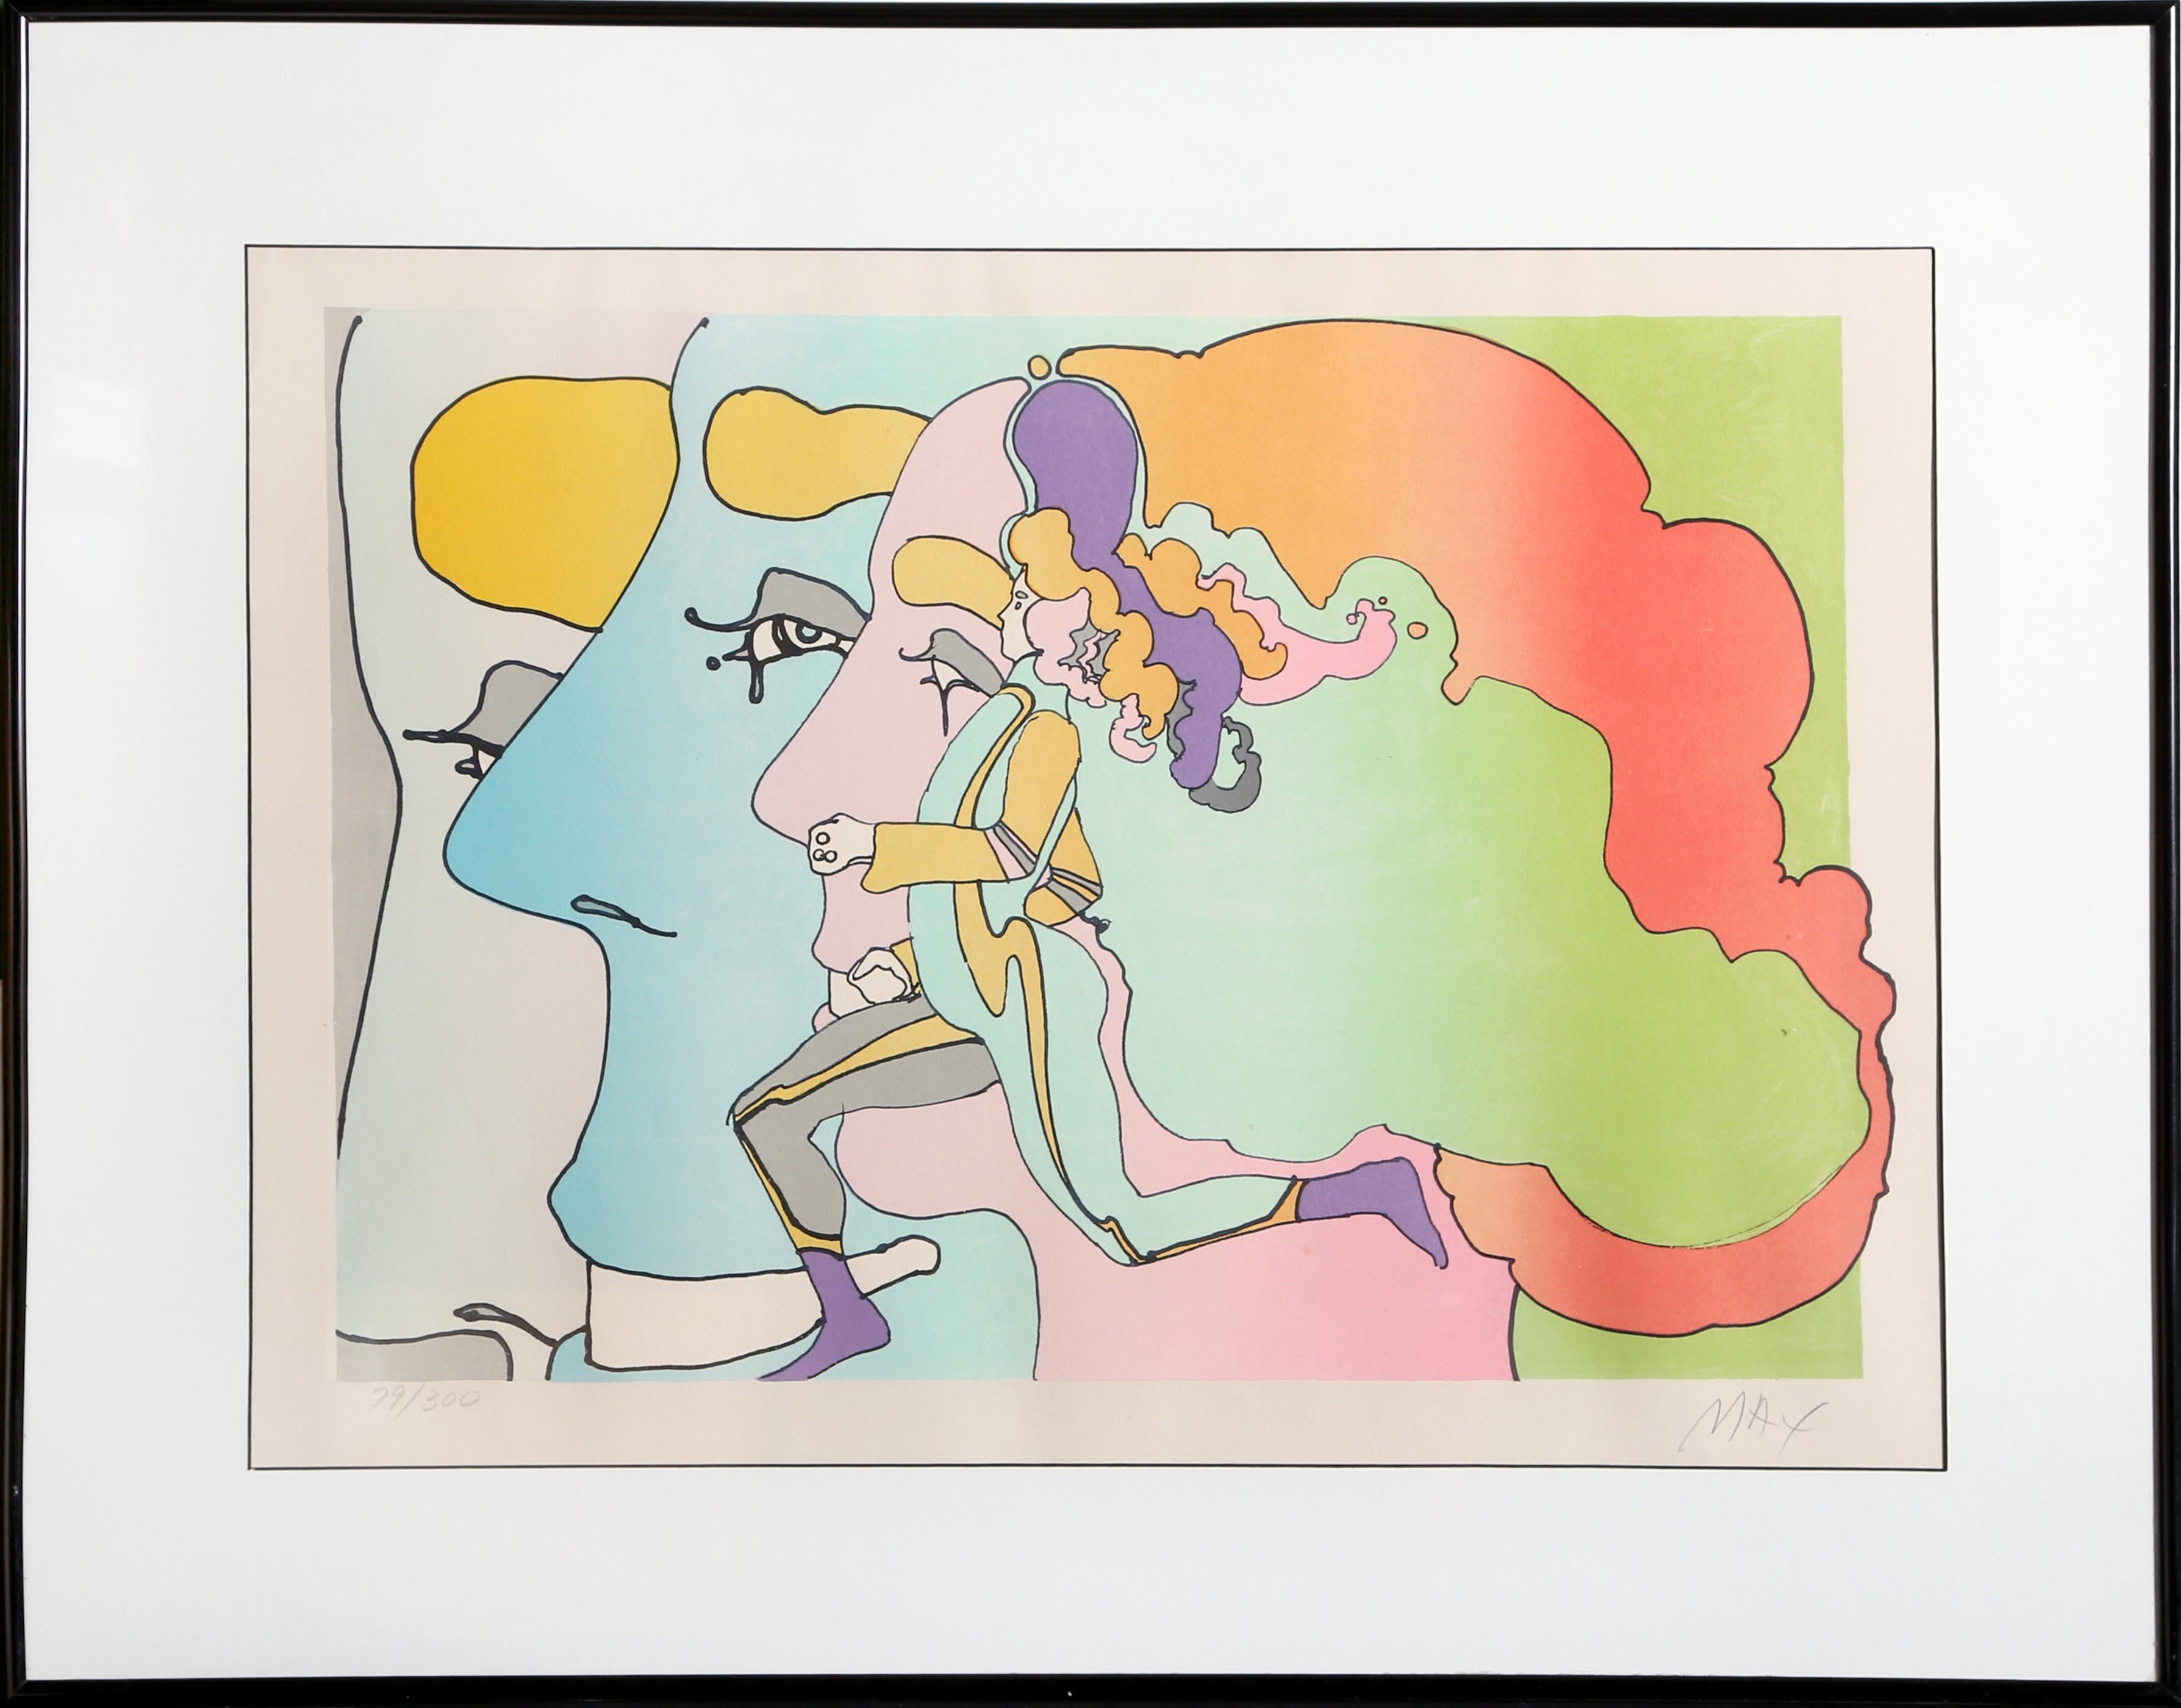 Artist: Peter Max, German/American (1937 - )
Title: Three Lords and Runner
Year: 1973
Medium: Lithograph, signed and numbered in pencil
Edition: 300
Image Size: 15 x 22 inches
Frame Size: 24.5 x 30.75 inches